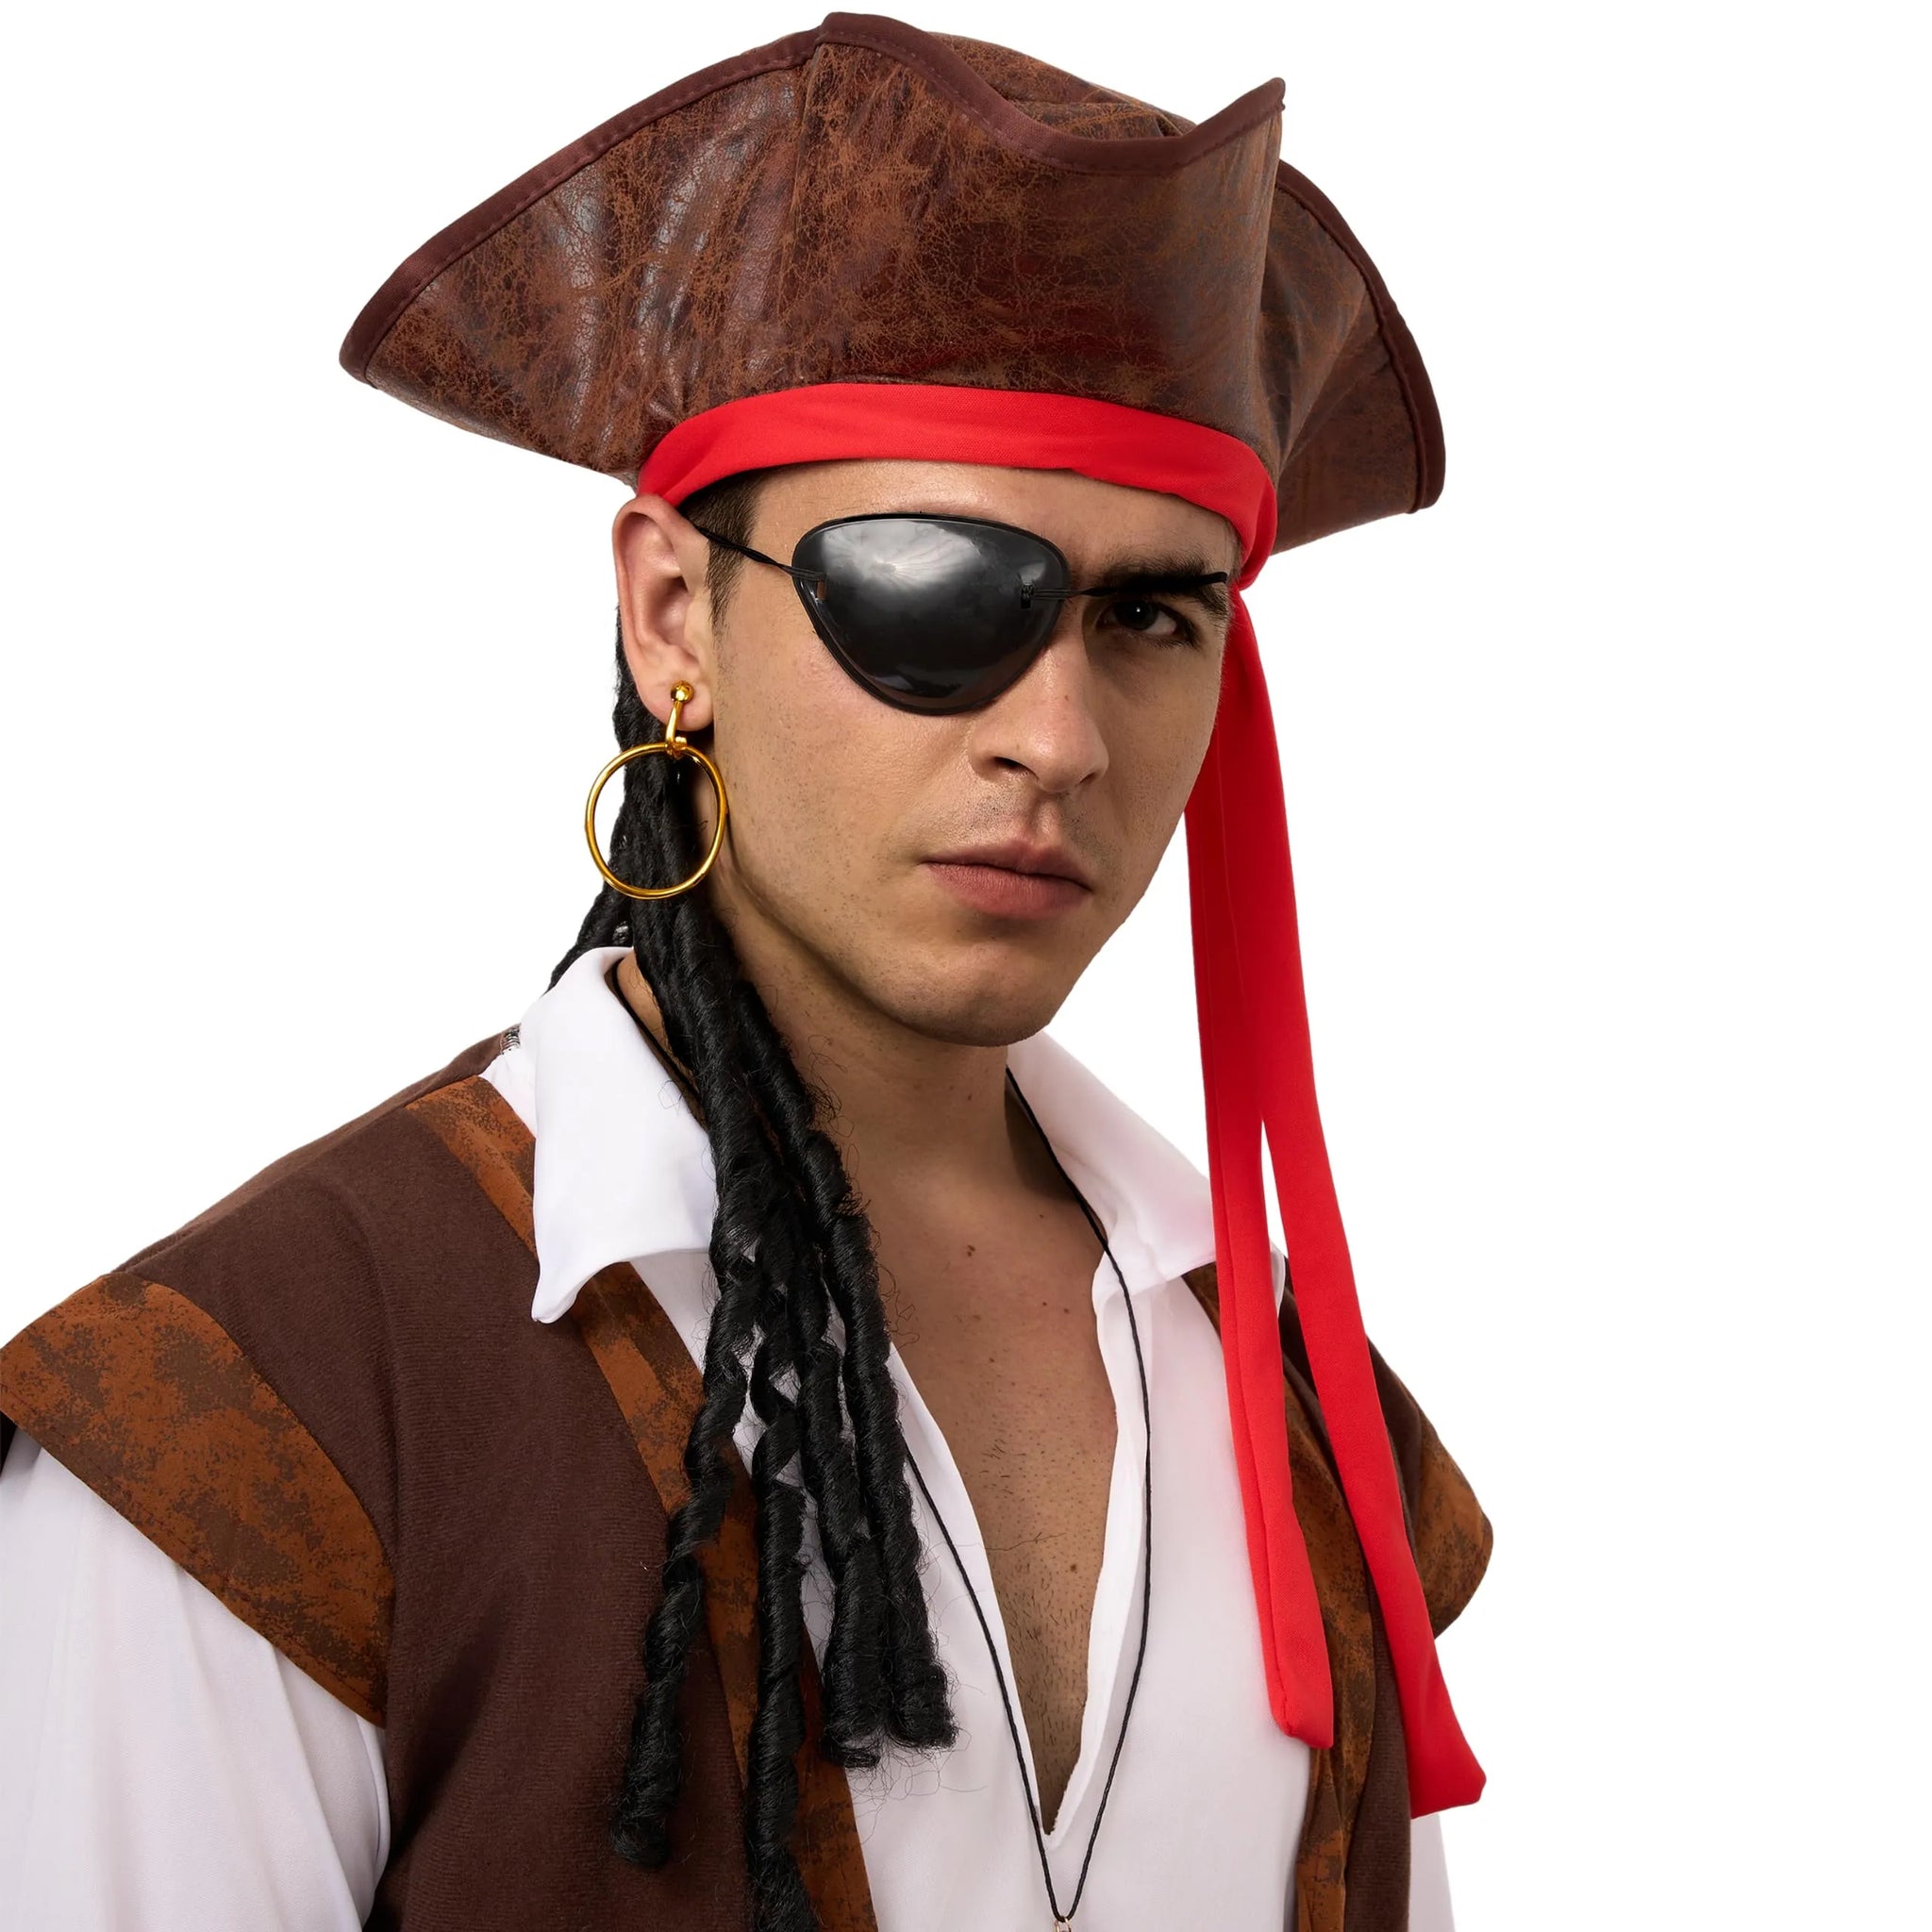 Satin Pirate Eye Patch, Costume accessory for Pirate Party